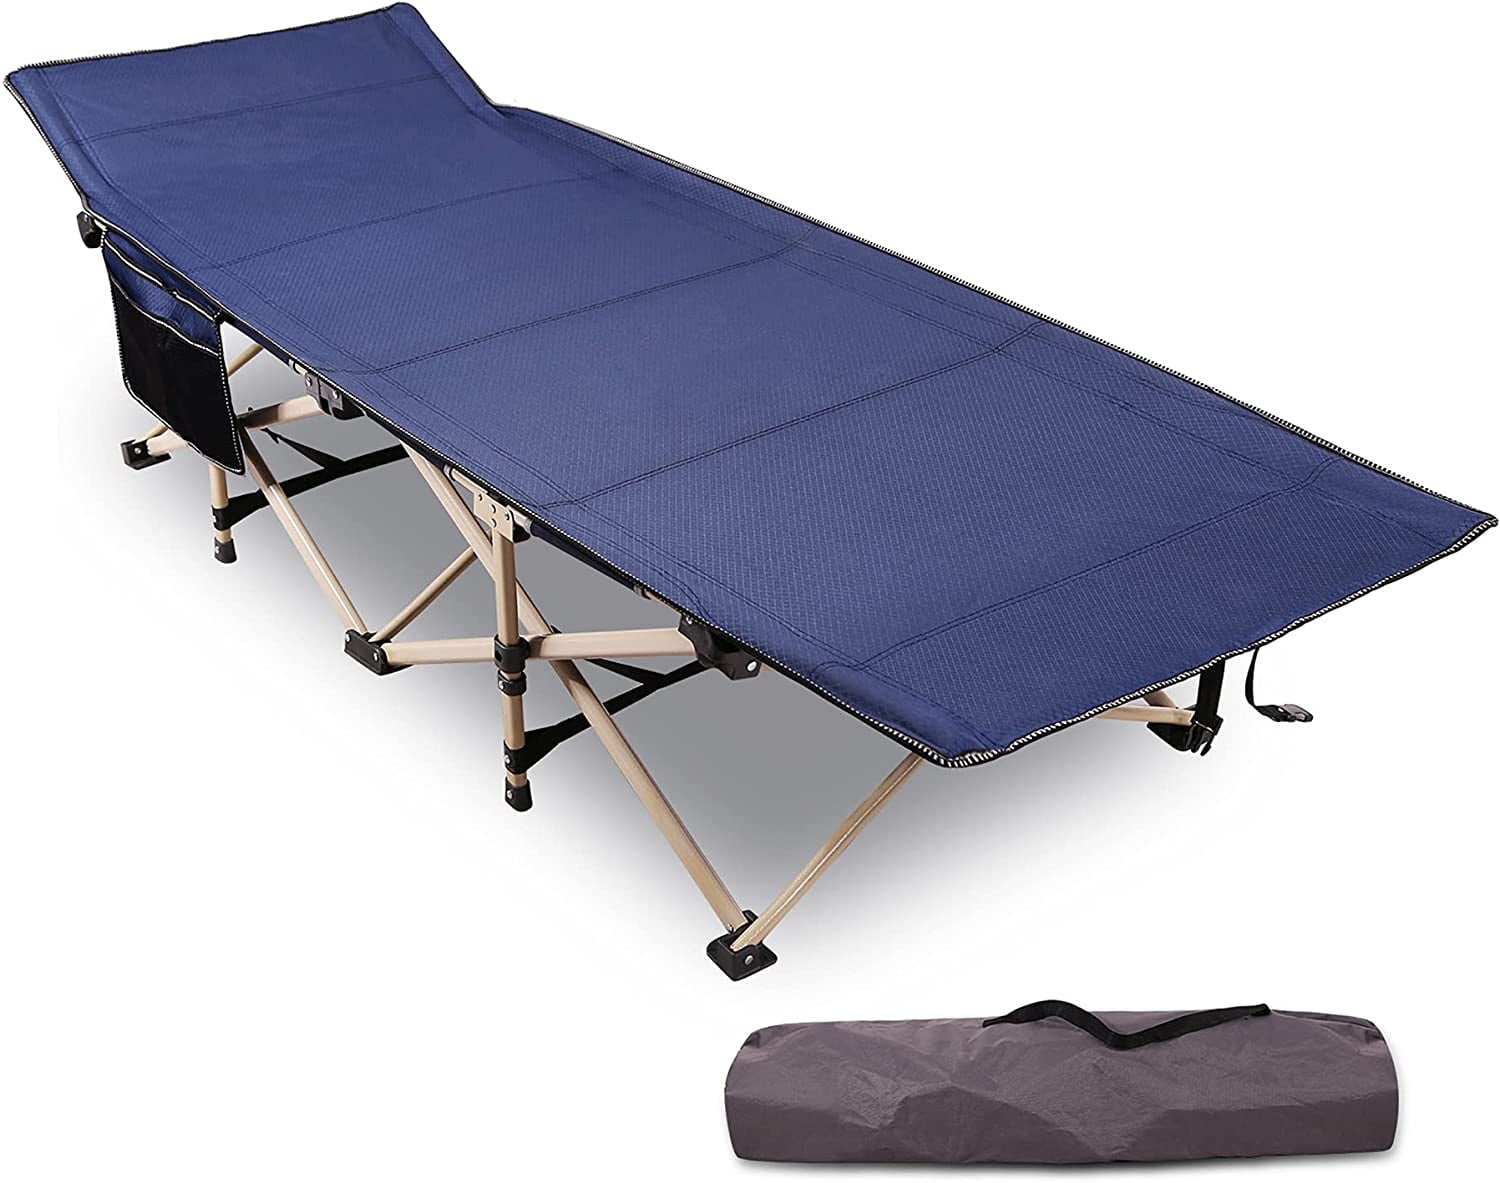 Home Lounging Beach Vocation FUNDANGO Foldable Camping Cot Portable Outdoor Bed with Free Organizer and Carry Bag for Car Camping Hunting Hiking Office Nap